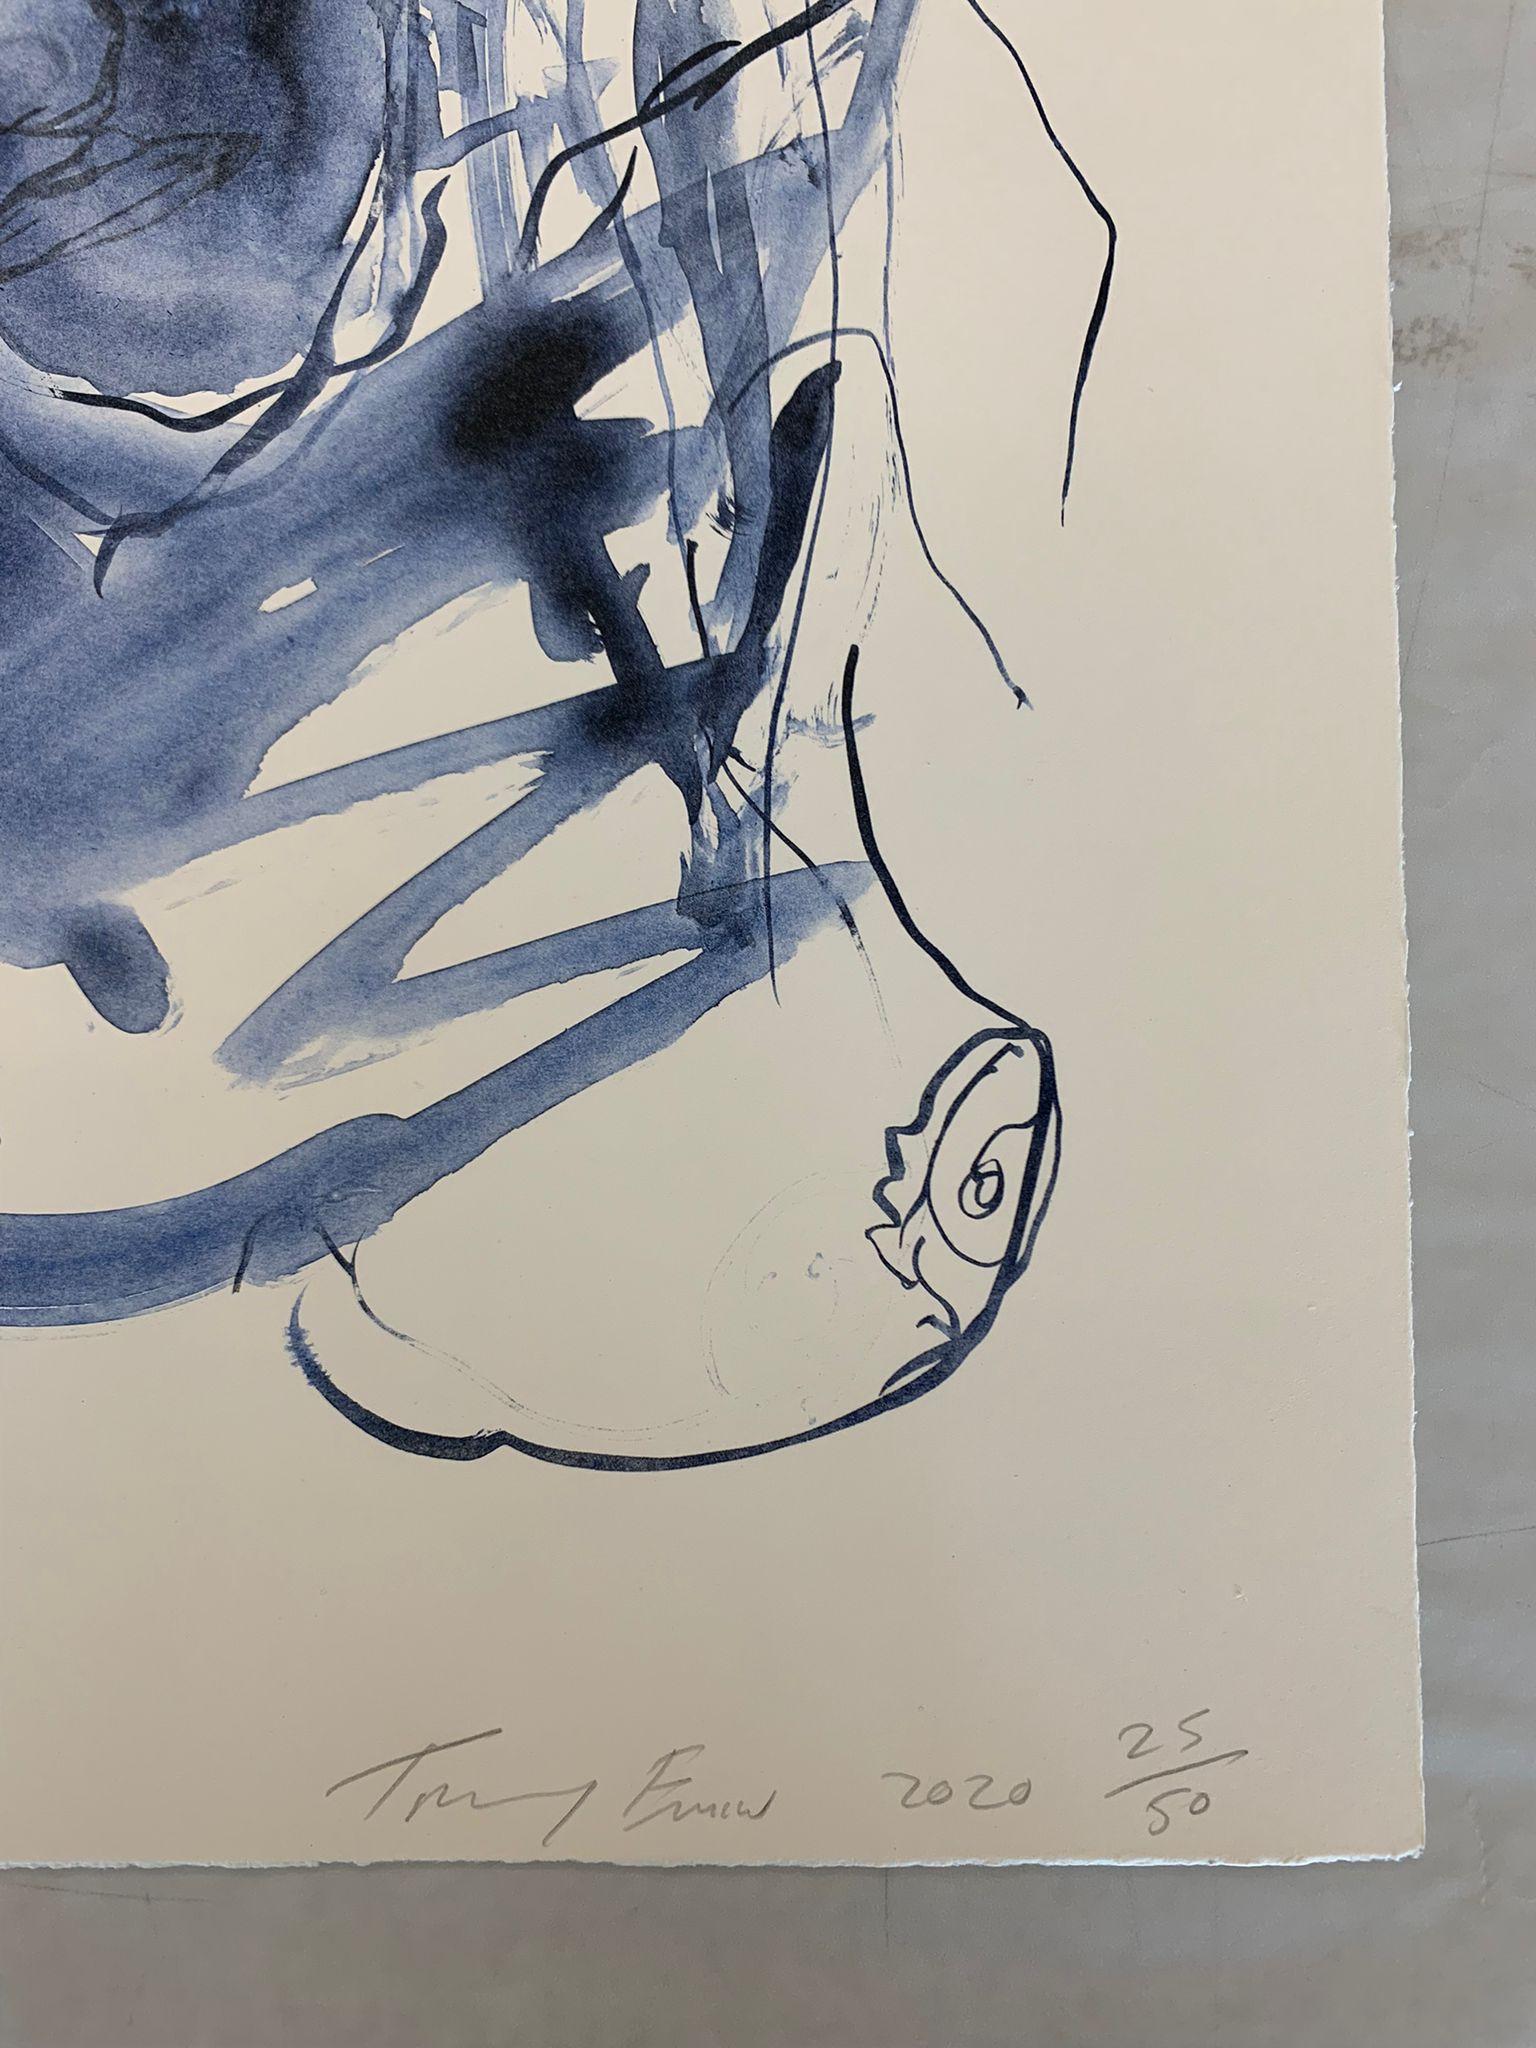 These Feelings Were True -Emin, Contemporary, YBAs, Lithograph, Blue, Portrait For Sale 10